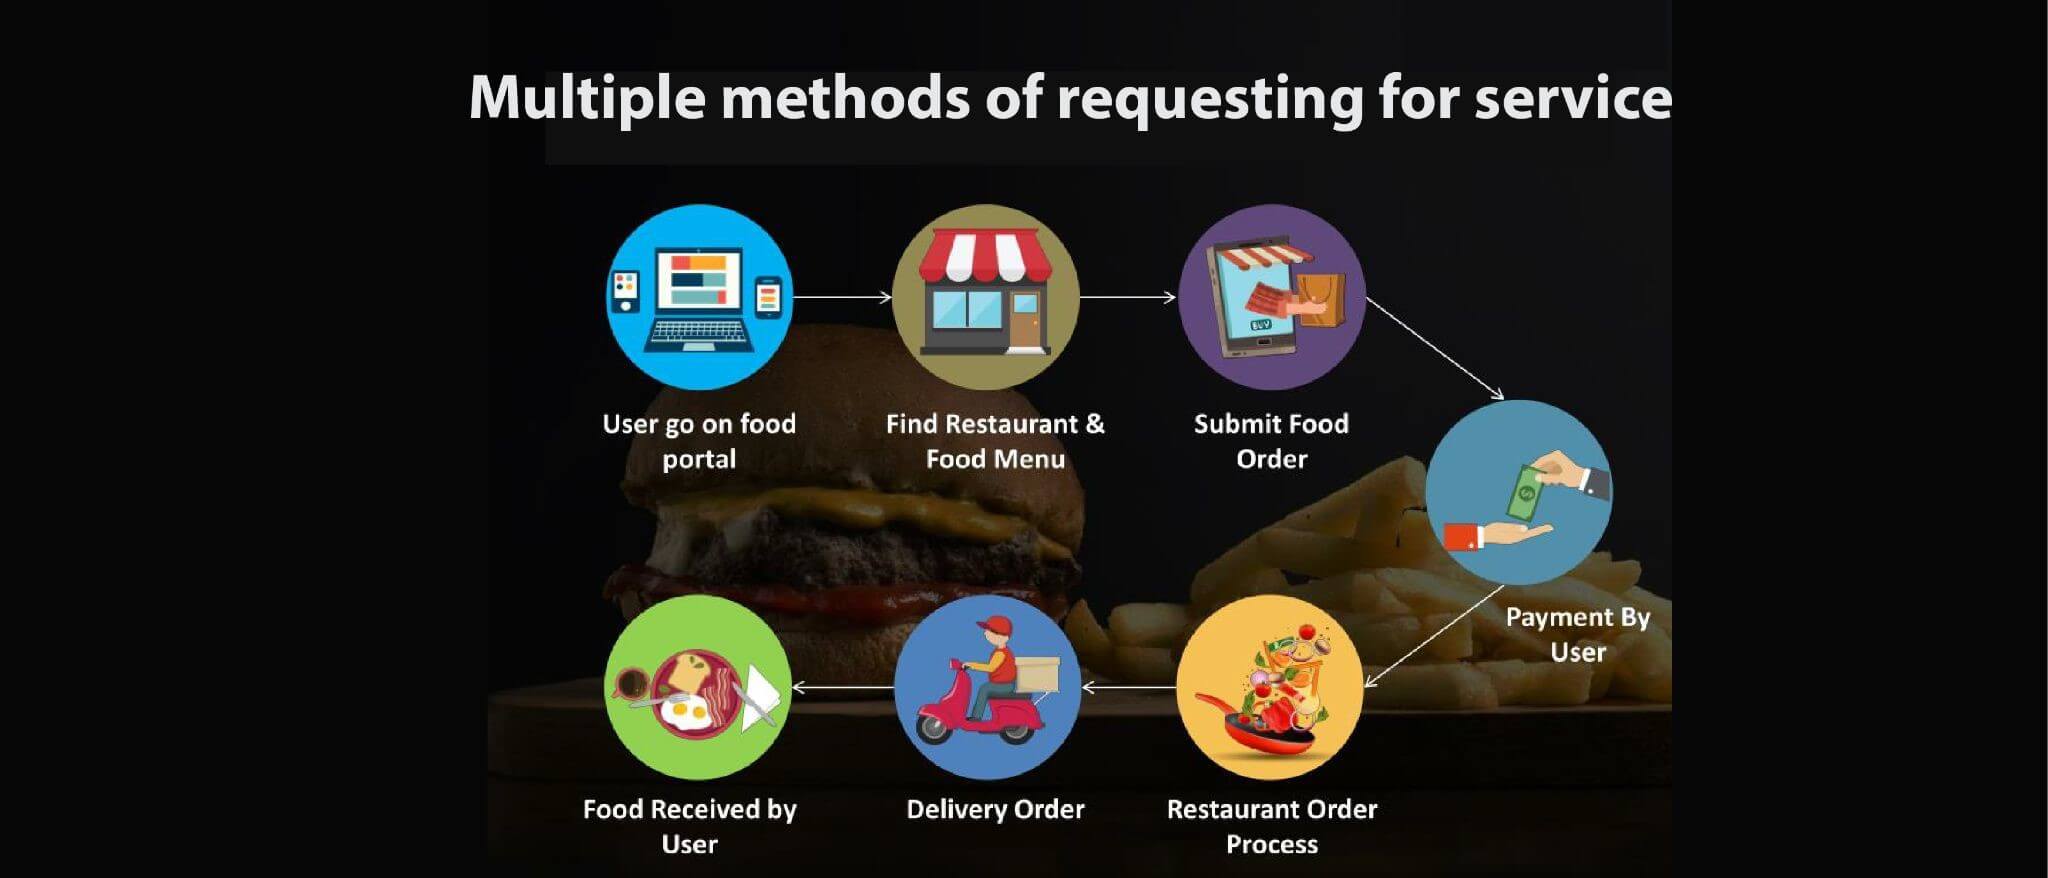 Multiple methods of requesting for service